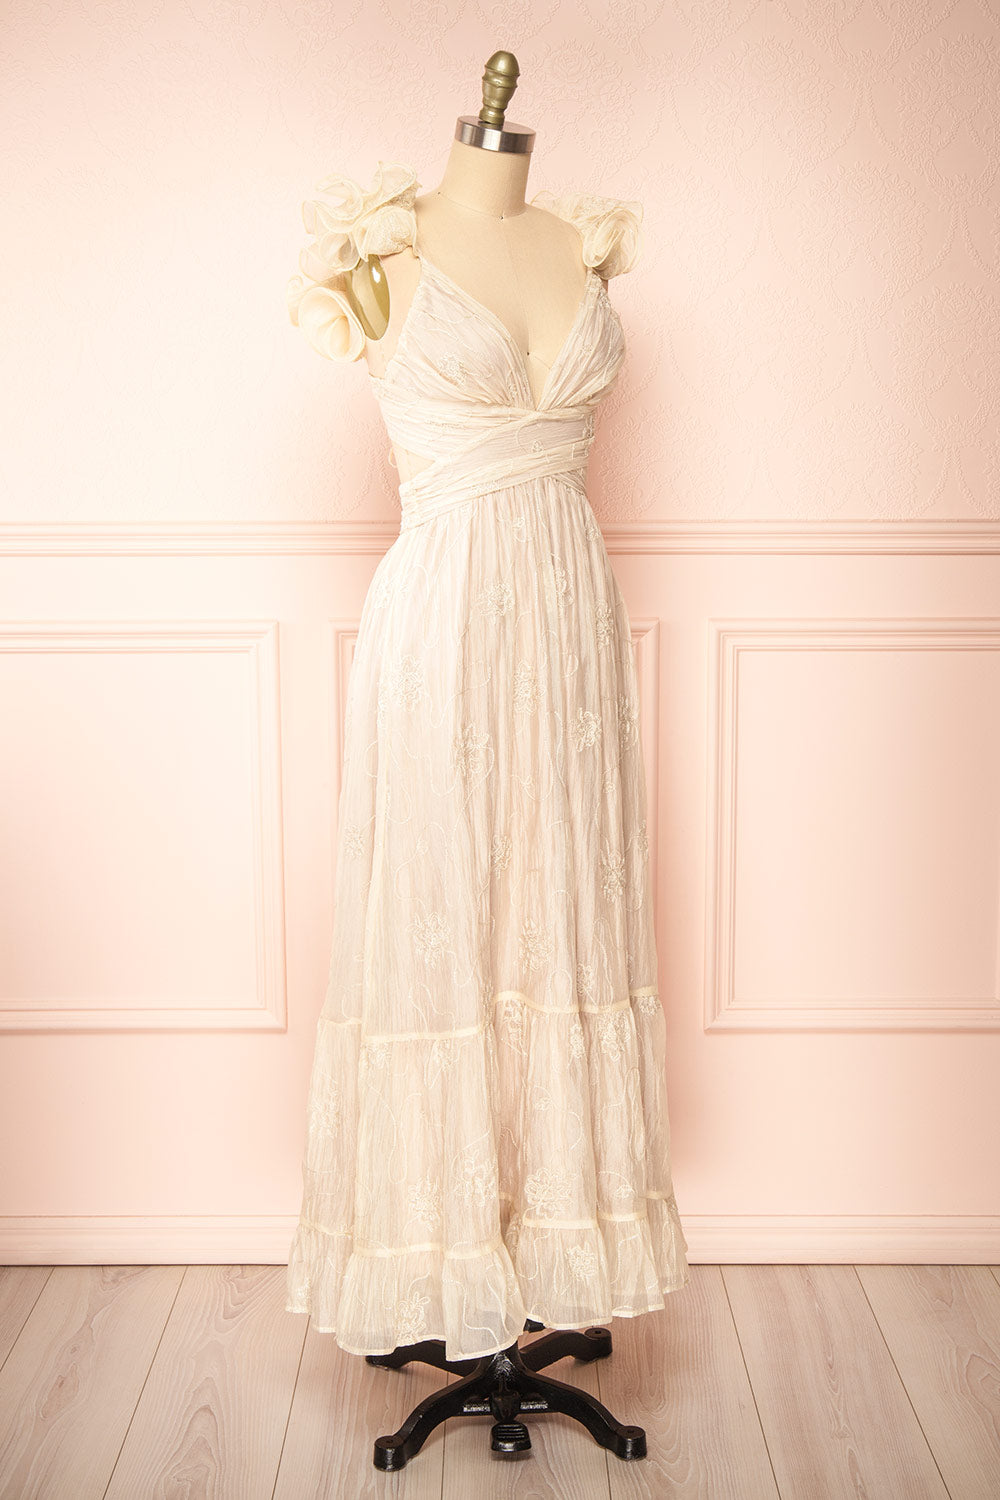 Isandra Long Embroidered Beige Dress w/ Ruffled Straps | Boutique 1861 side view